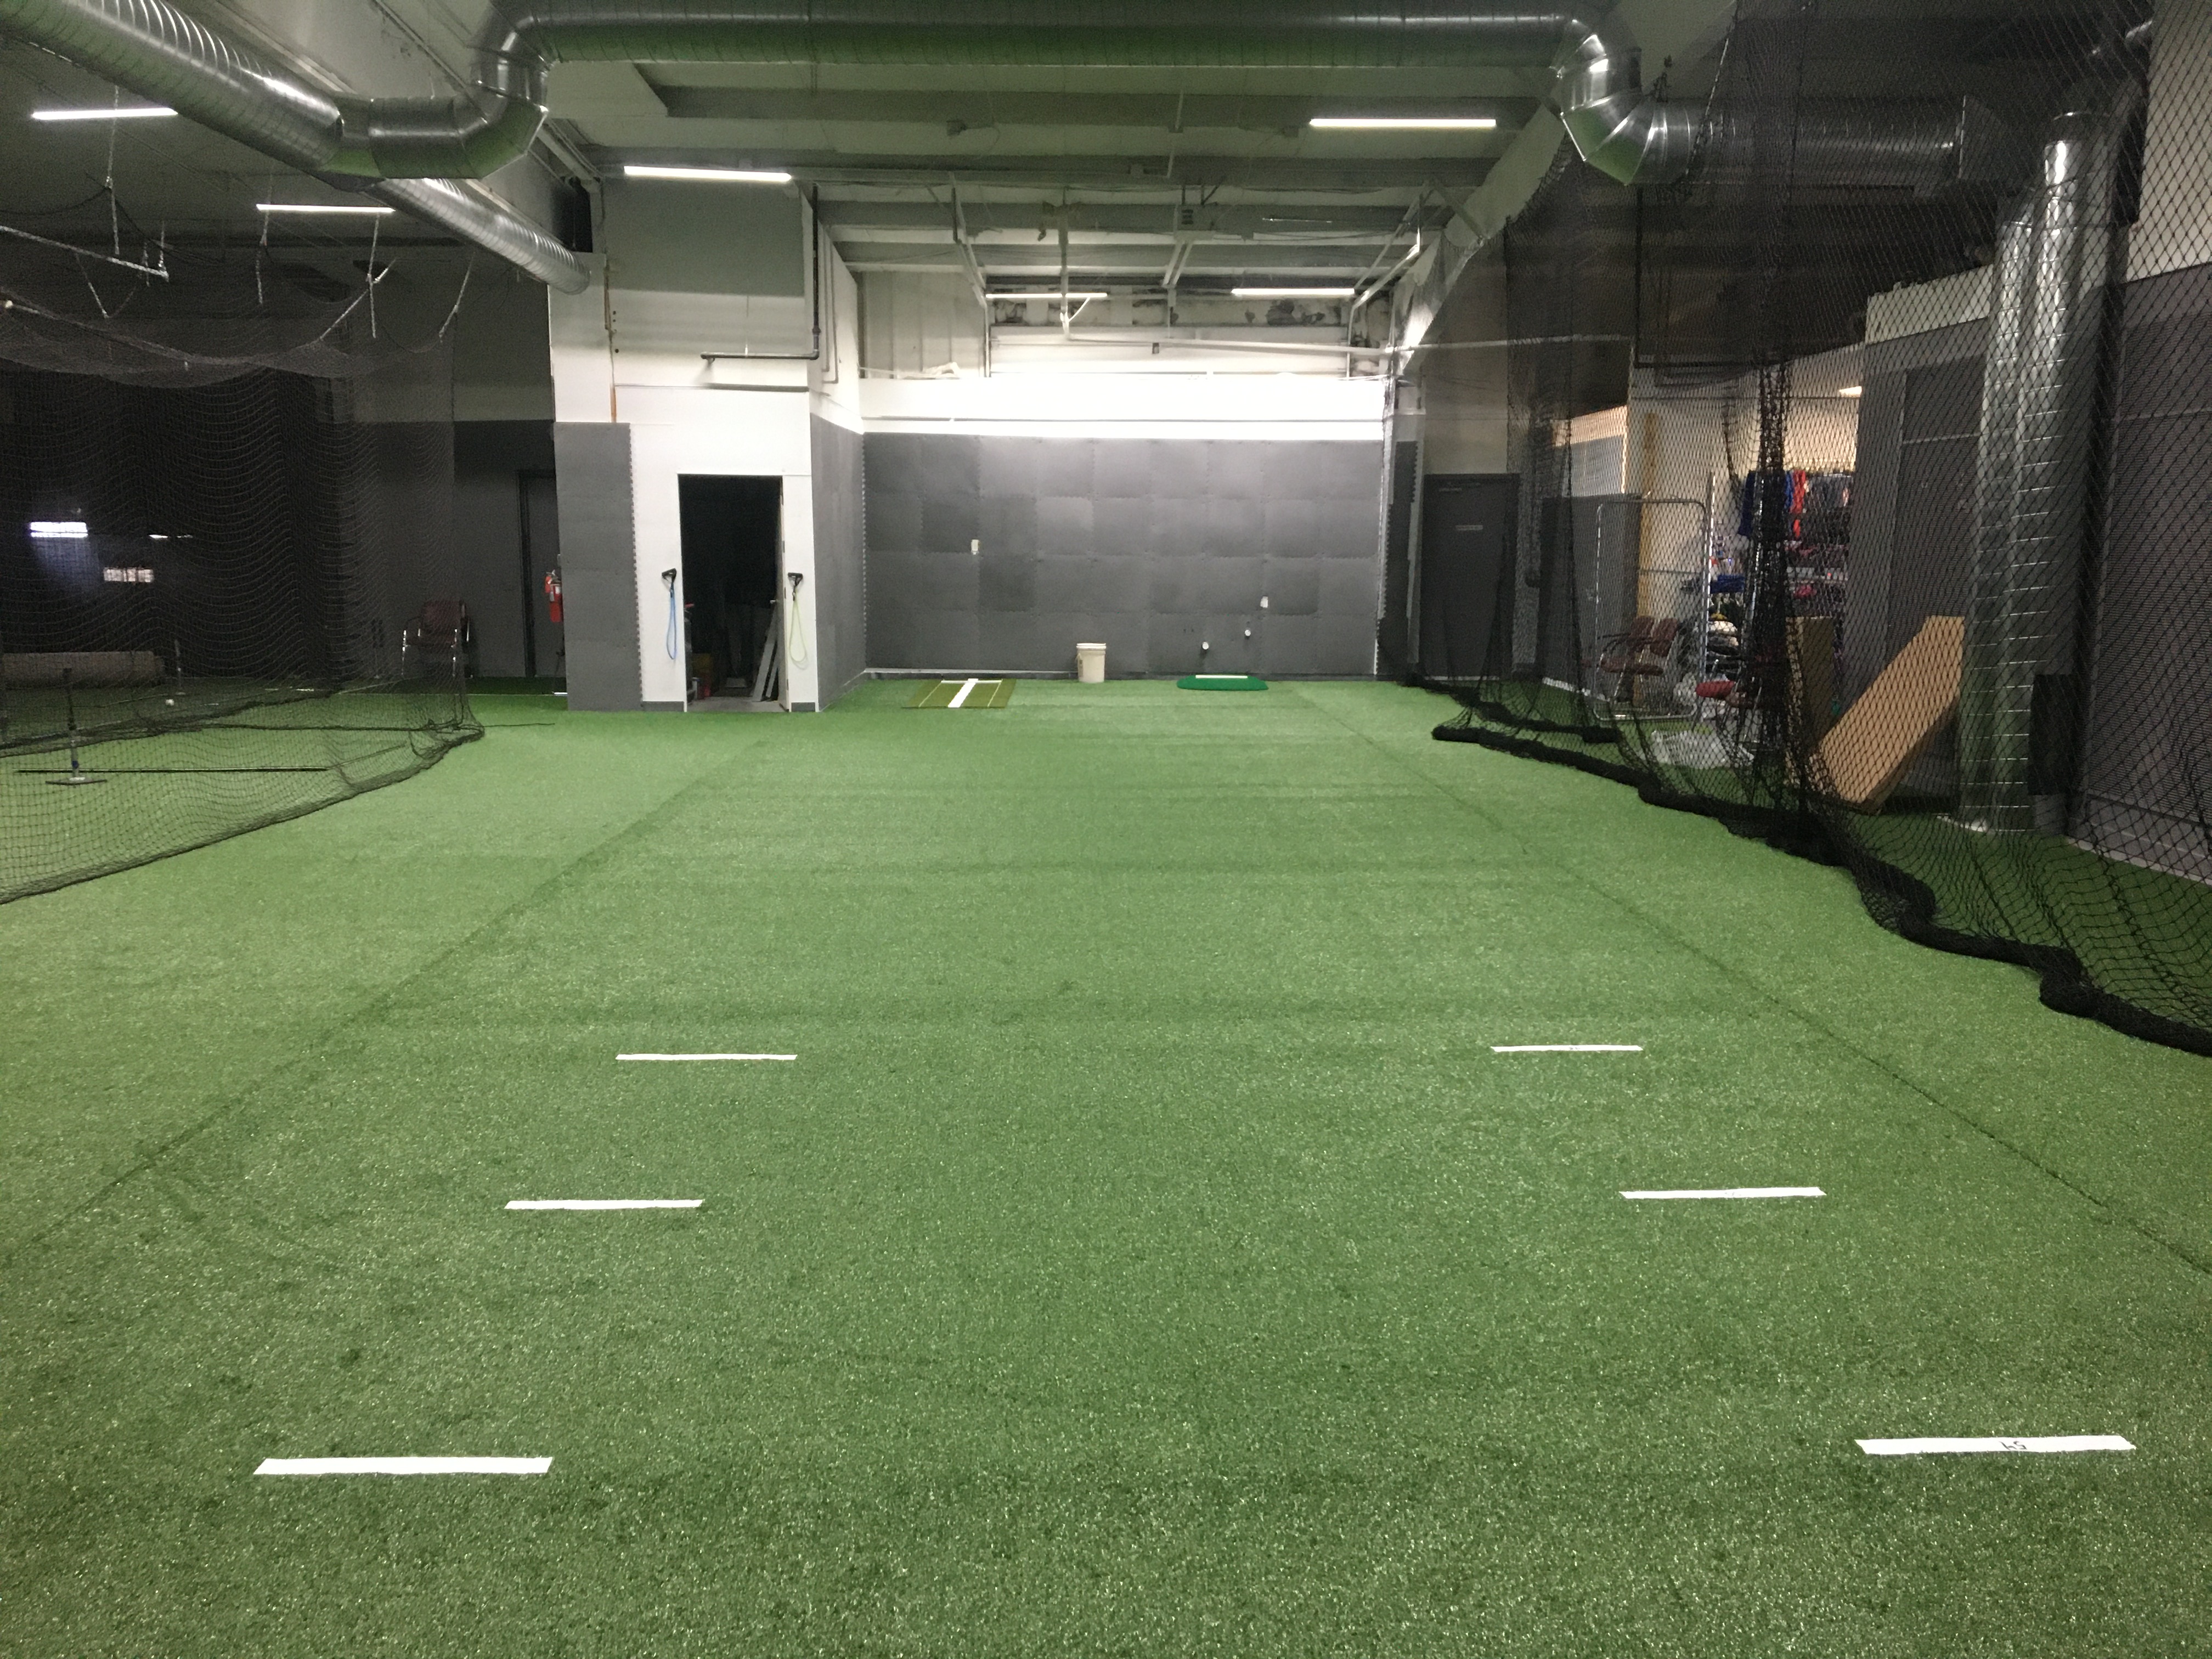 Pitching lanes from home plate